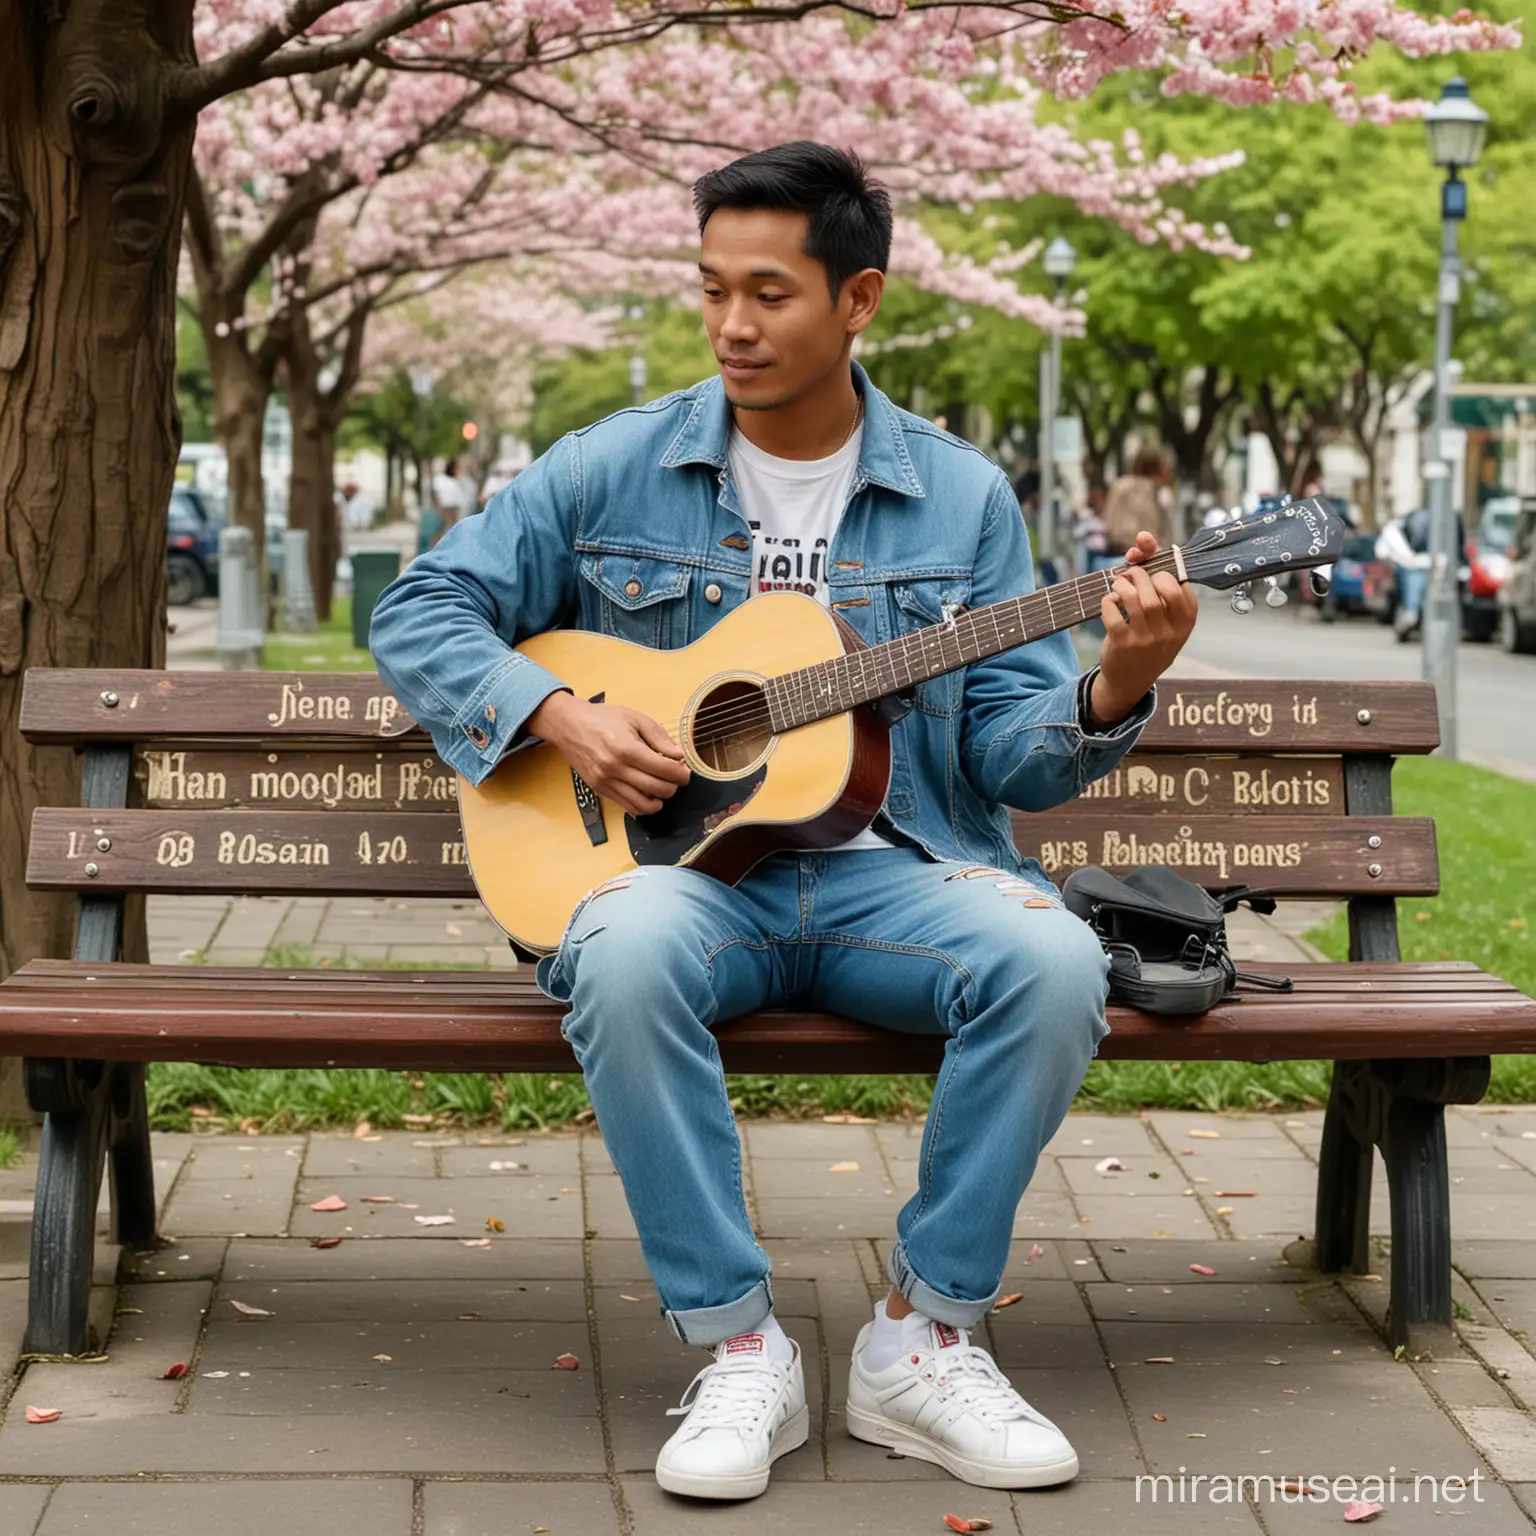 Indonesian Man Playing Guitar on Park Bench with Vespa